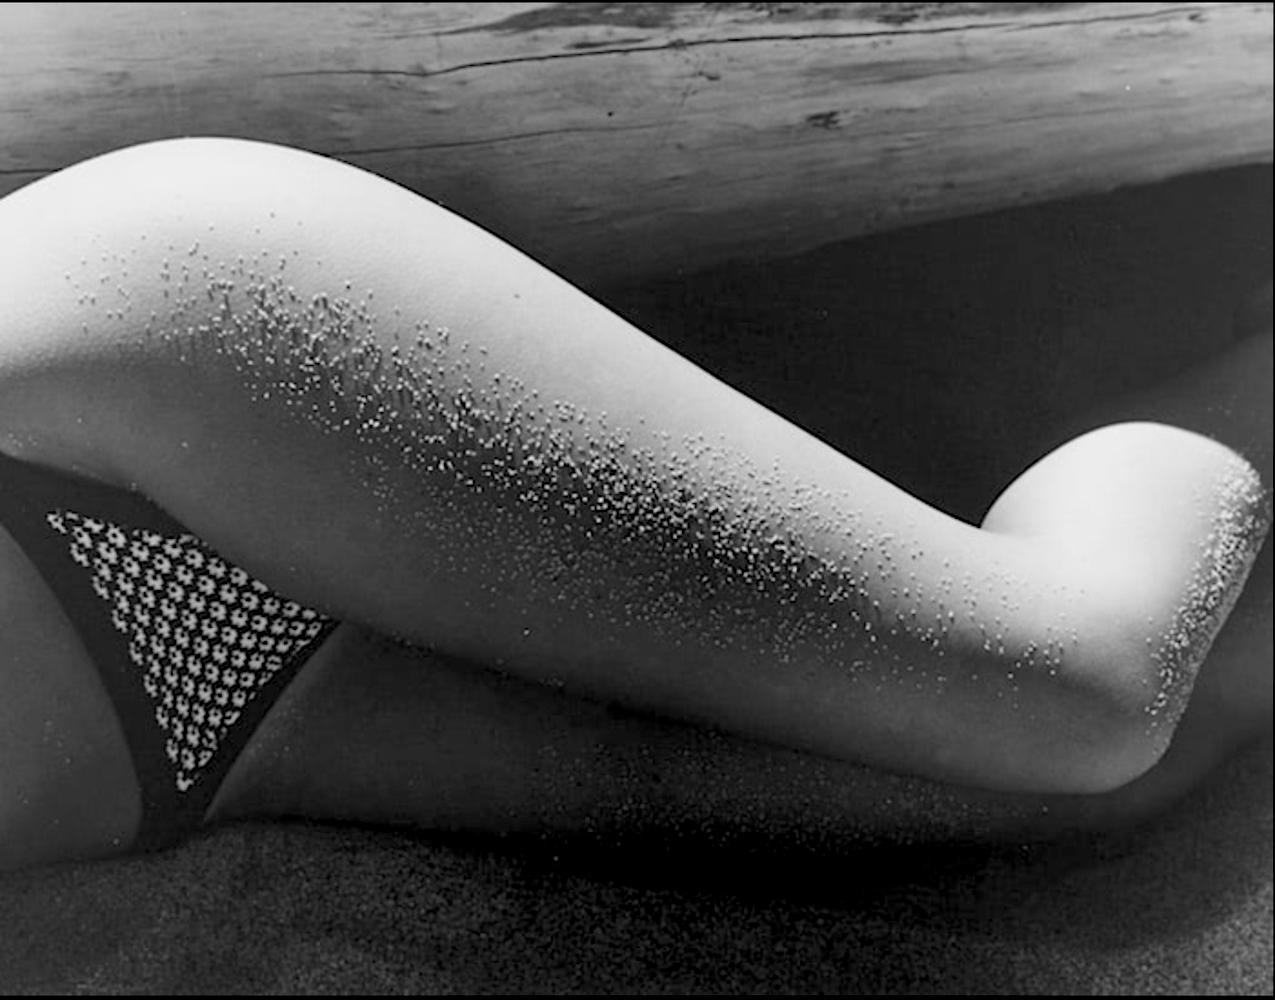 Alli Wood Nude Photograph - Hundreds & Thousands, Big Sur California. Legs with Sand Sprinkles 